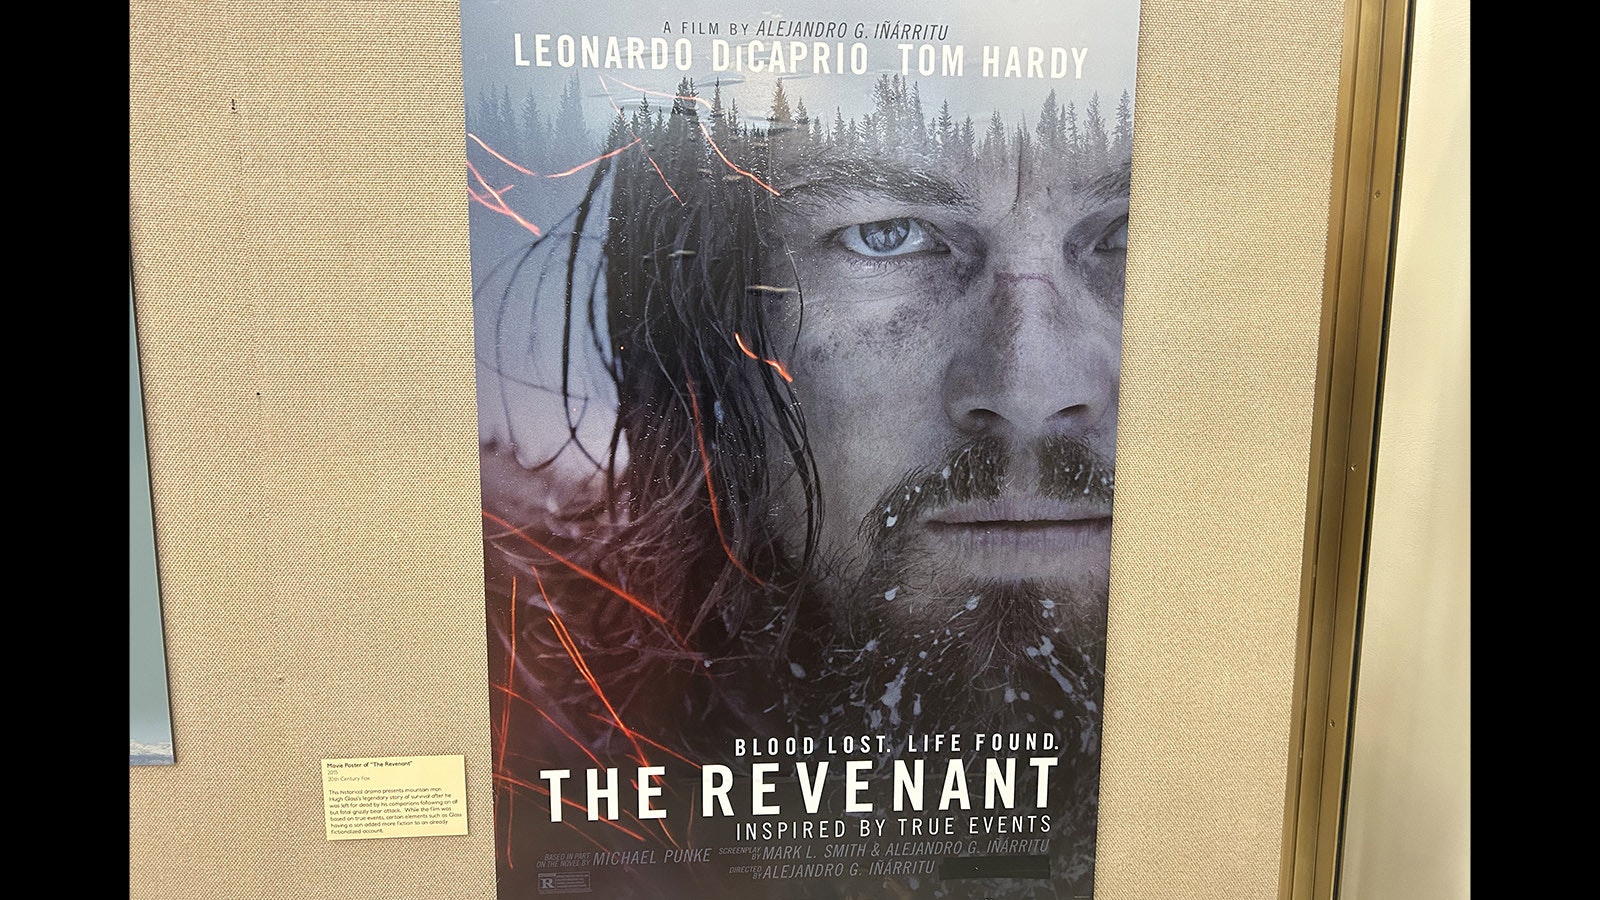 The 2015 film “The Revenant” starring Leonardo DiCaprio is loosely based on mountain man Hugh Glass and his incredible story of survival.